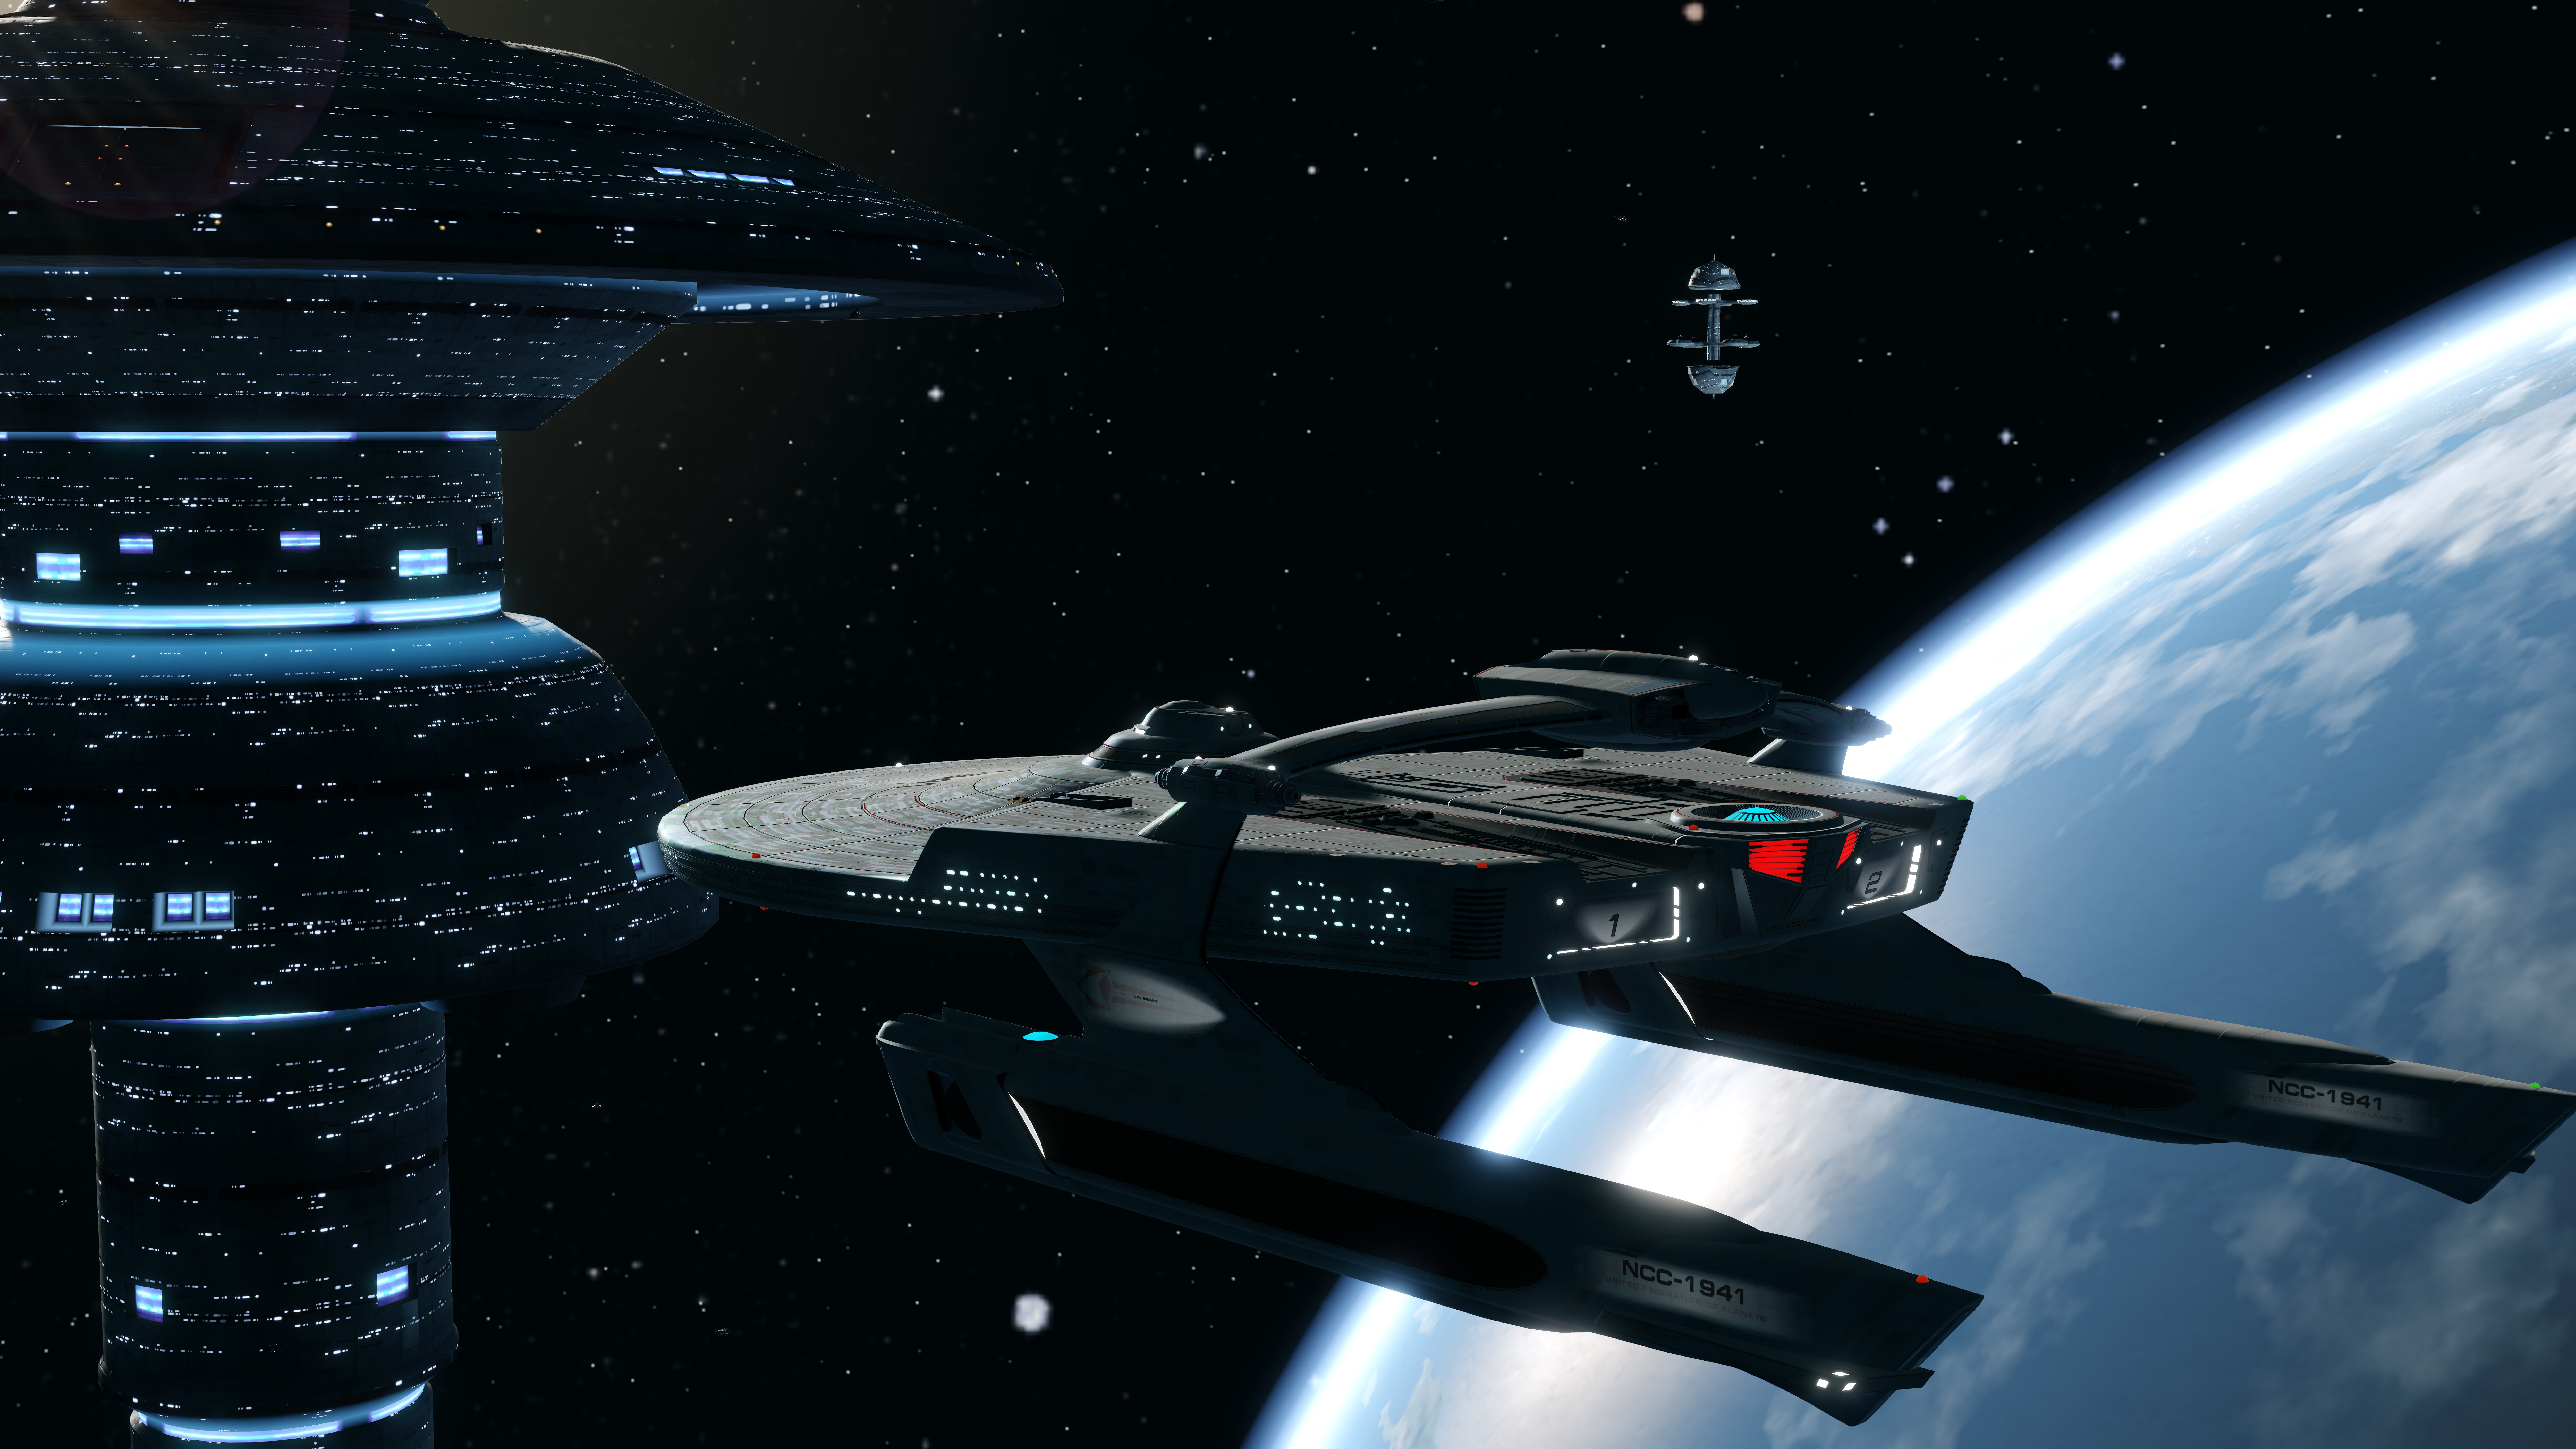 USS Bozeman NCC 1941 returns to Earth spacedock after being found by the USS Enterprise